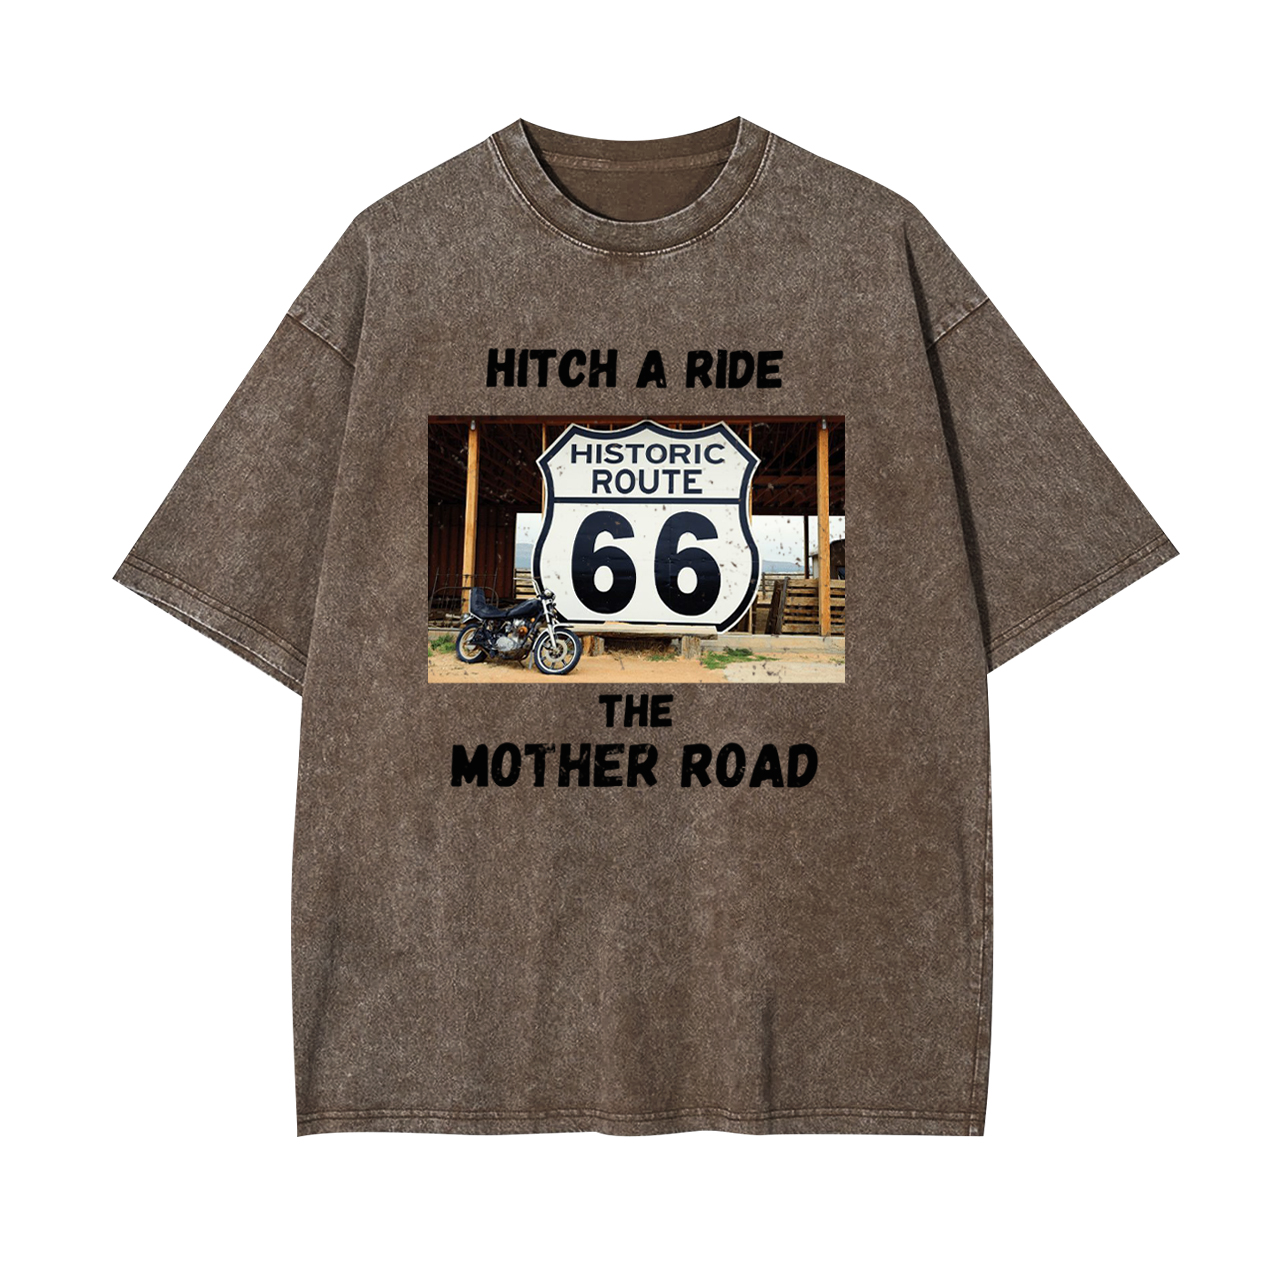 Hitchhiking Along the Mother Road's Historic Route 66 Garment-dye Tees